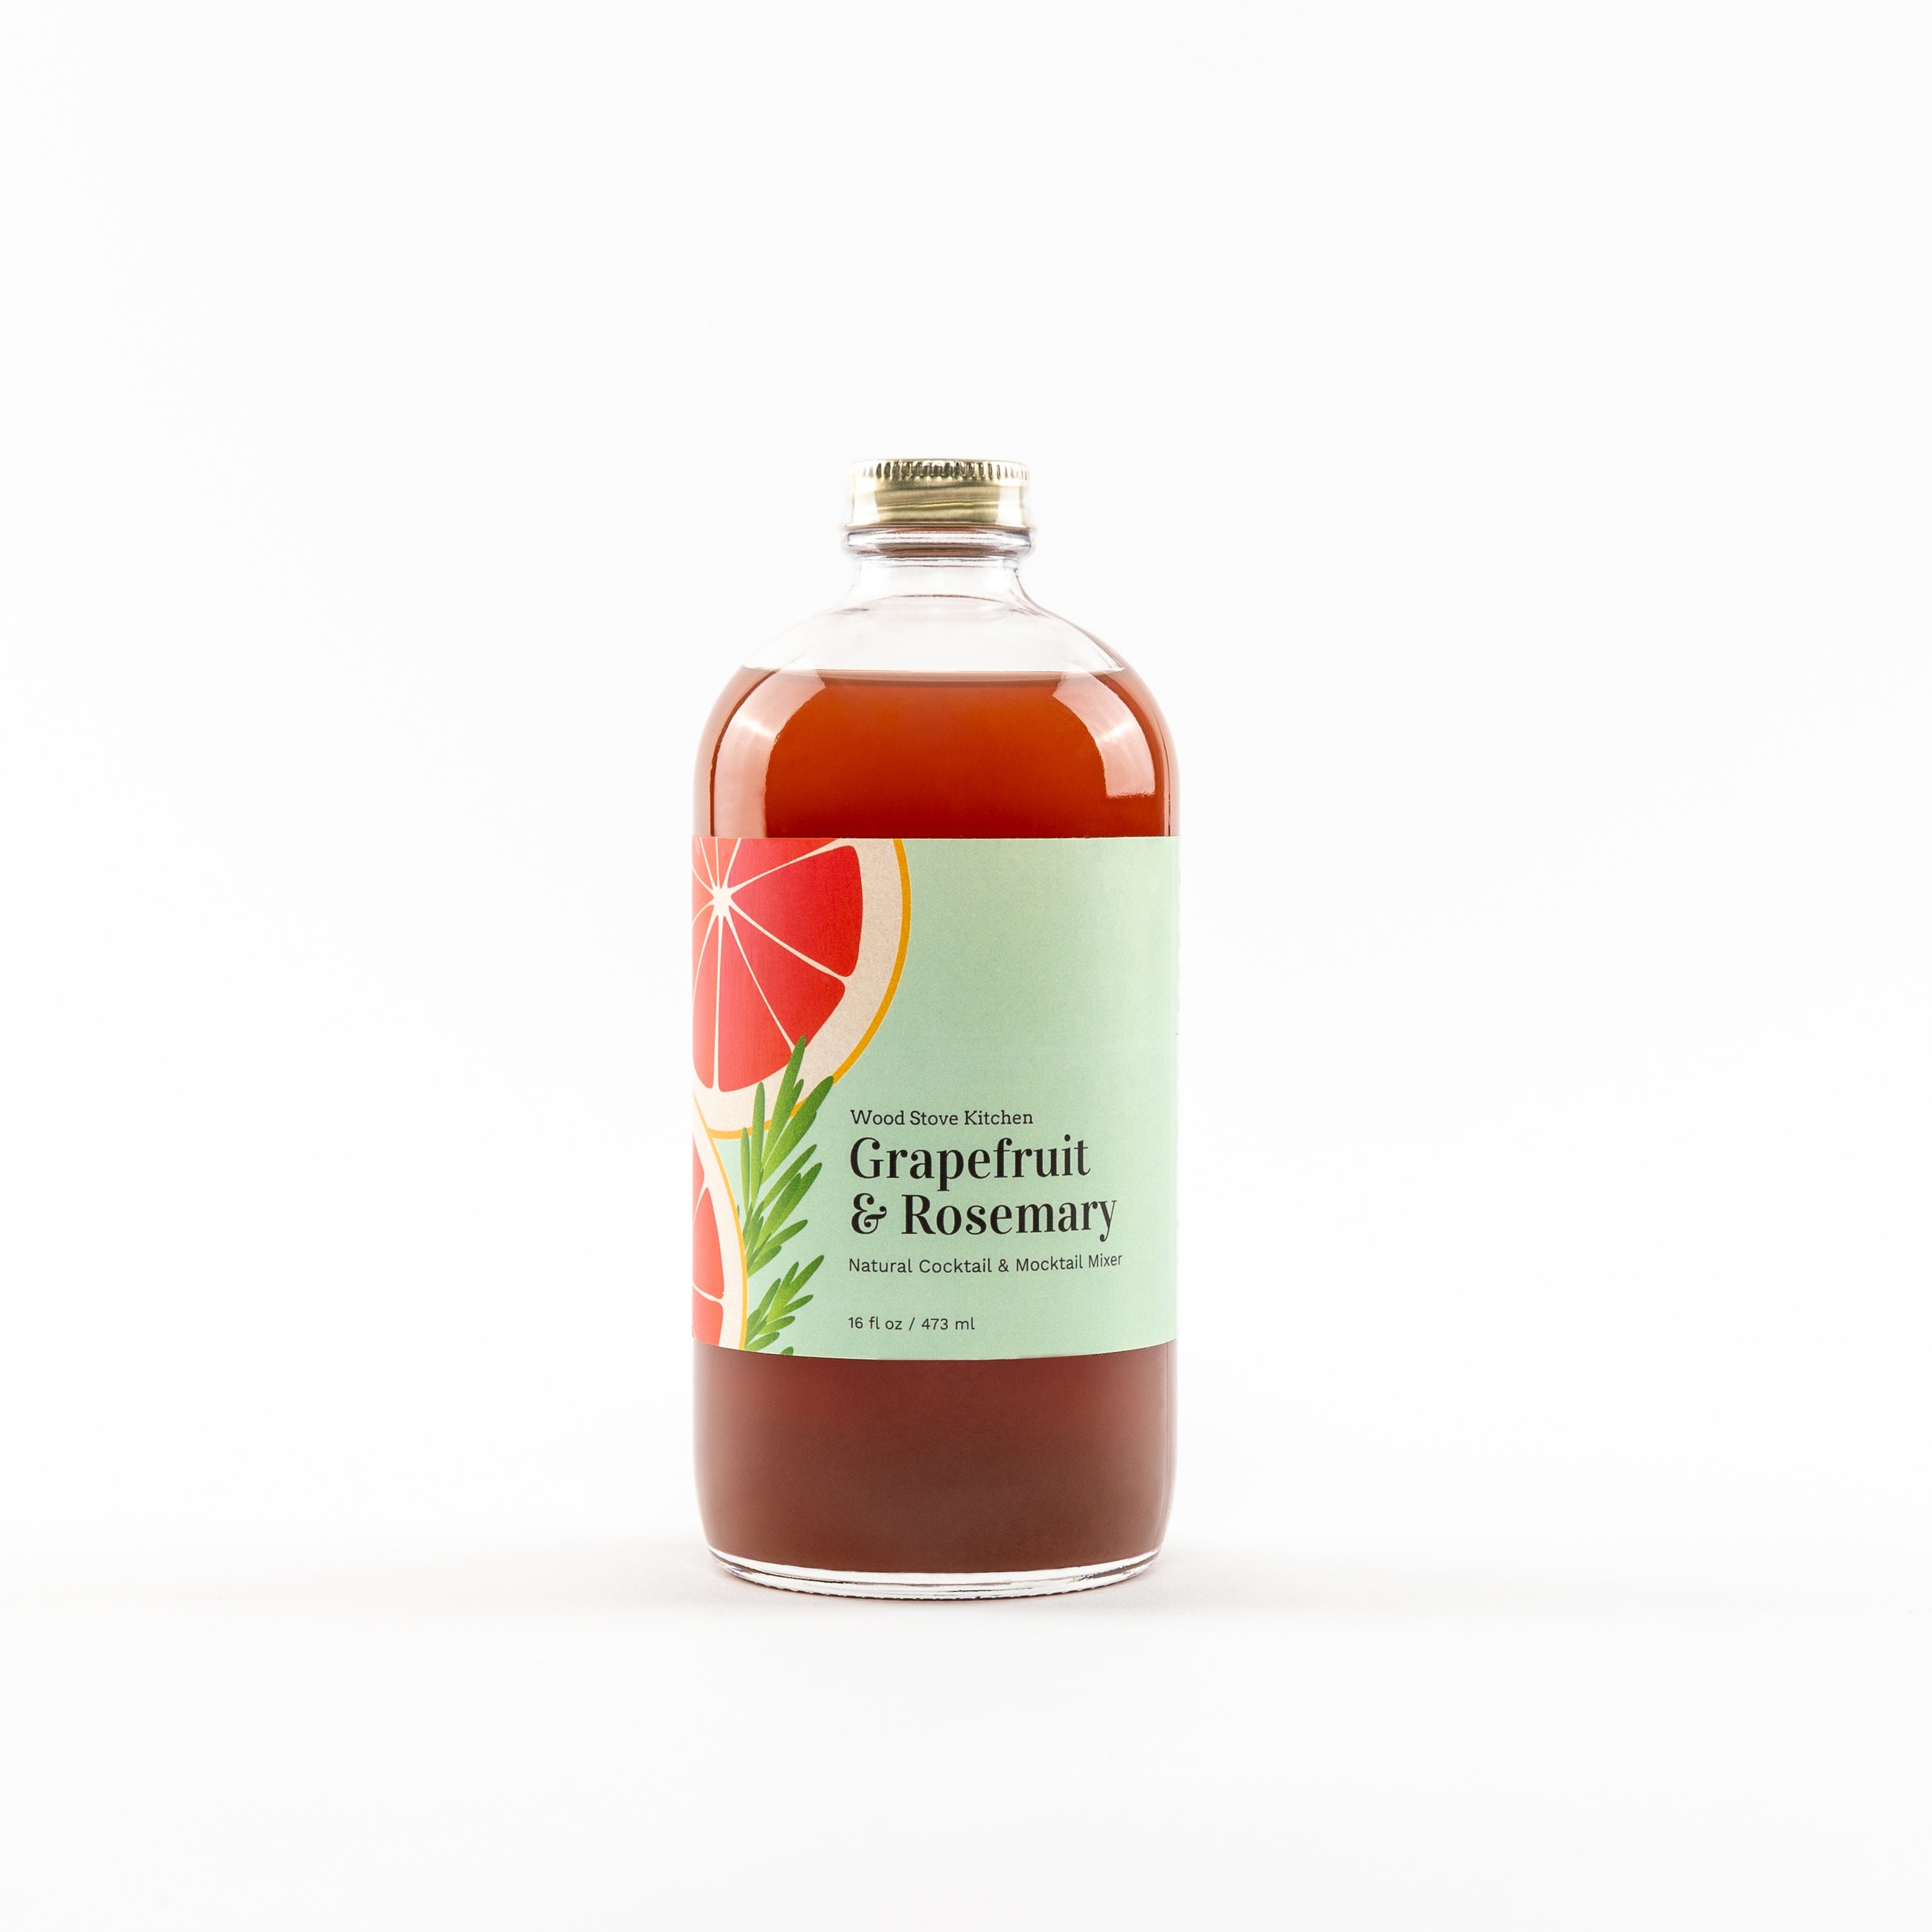 Wood Stove Kitchen - 'Grapefruit & Rosemary' Cocktail Mixer (16OZ) - The  Epicurean Trader